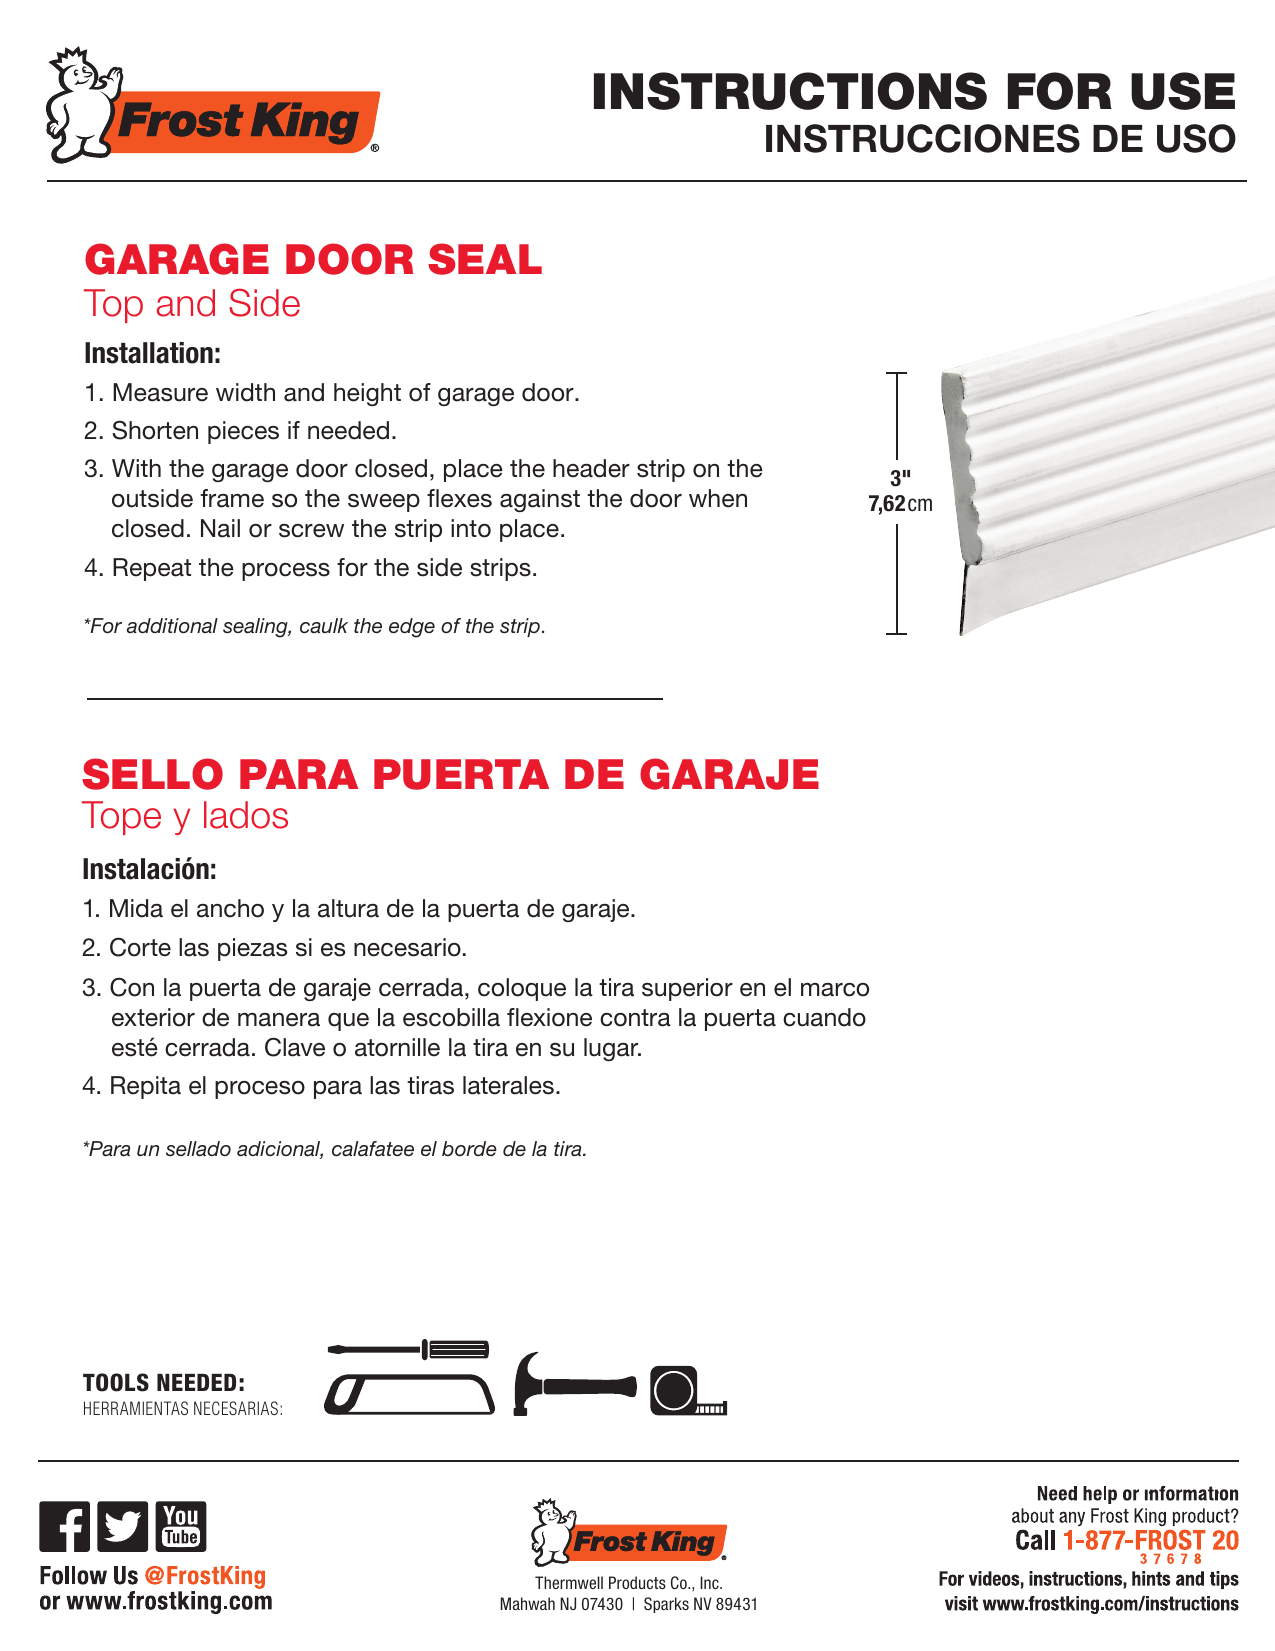 Frost King Gr9 9 Ft X 3 In Vinyl, How To Install Frost King Garage Door Top And Side Seal Kit